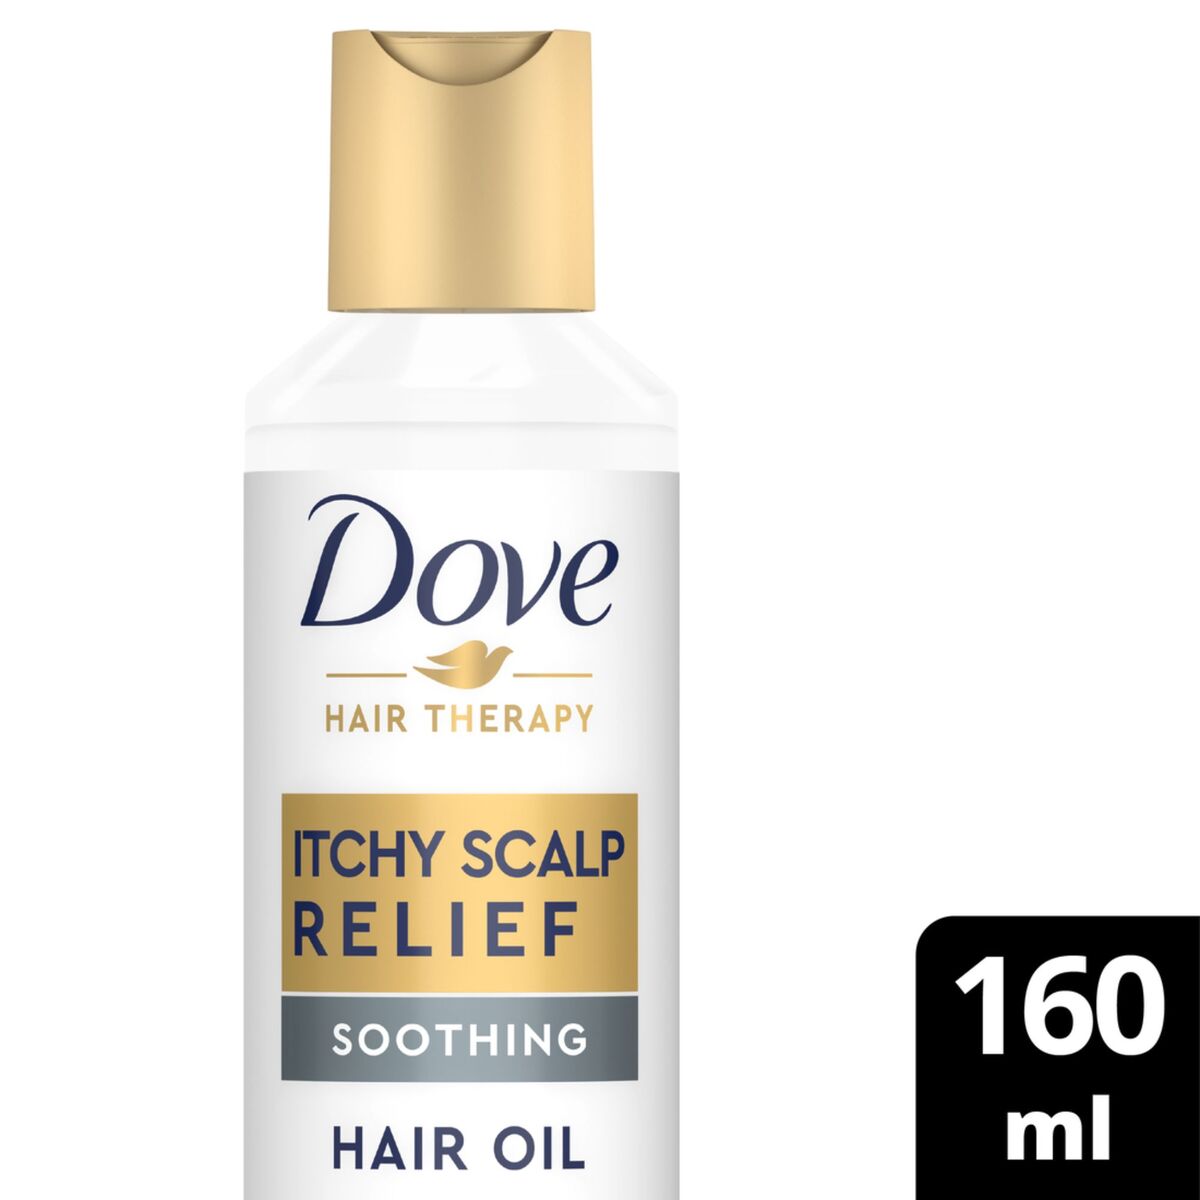 Dove Hair Therapy Itchy Scalp Relief Anti Dandruff Pre -Wash Hair Oil 160 ml